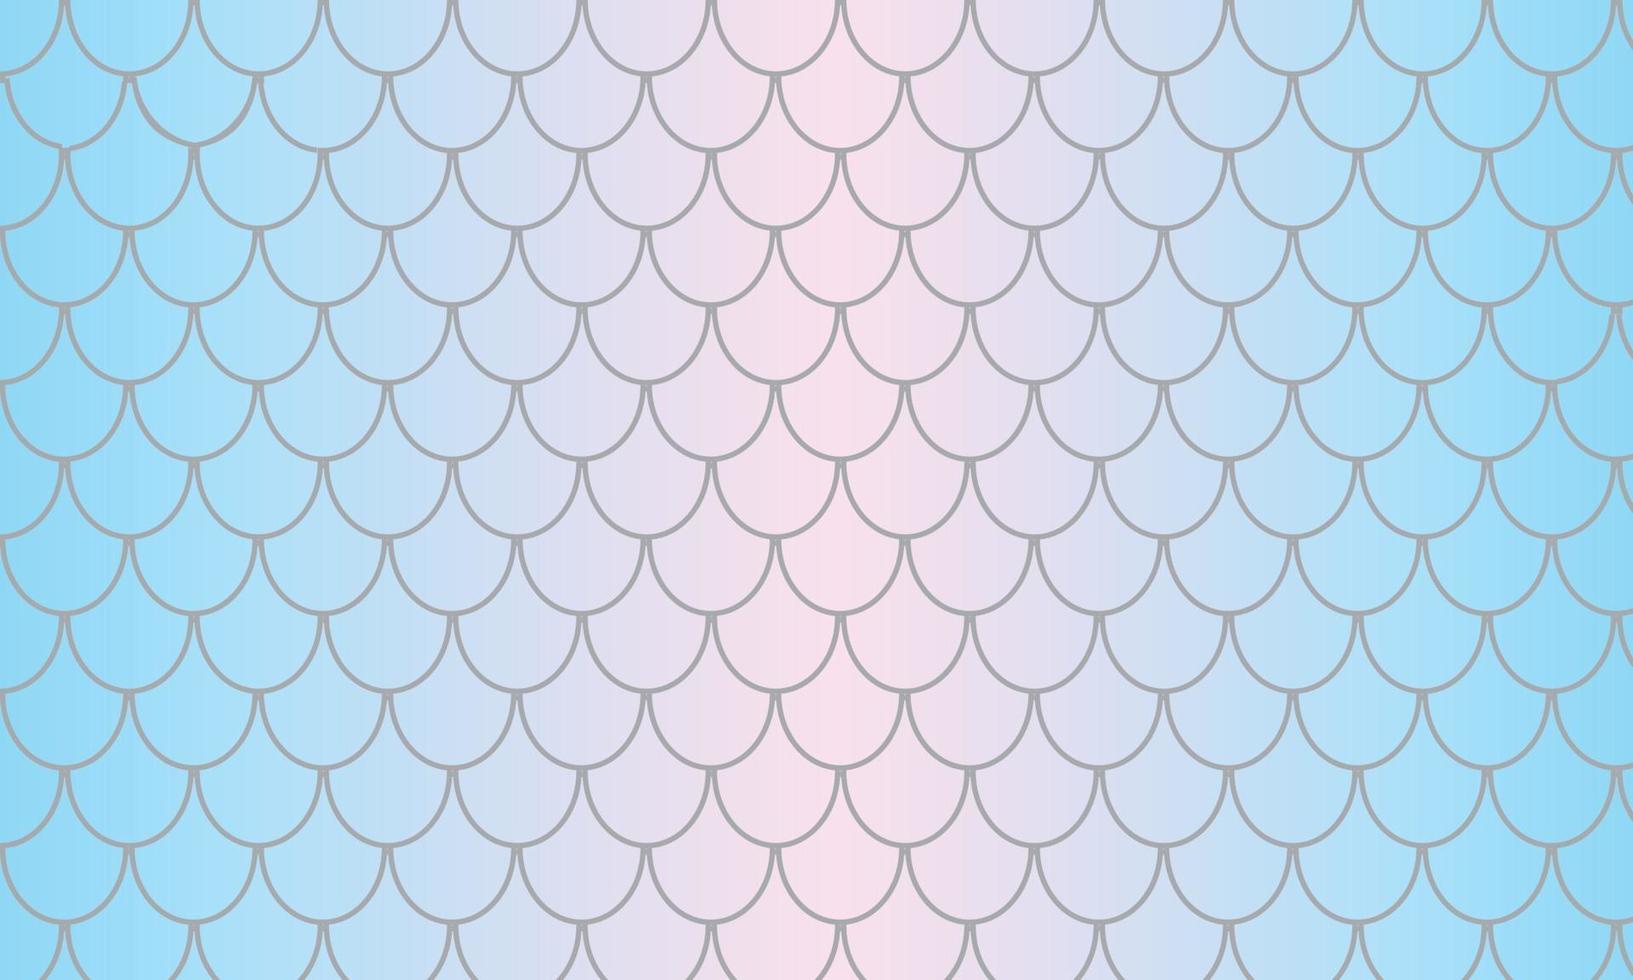 fish scales blue and pink texture background vector